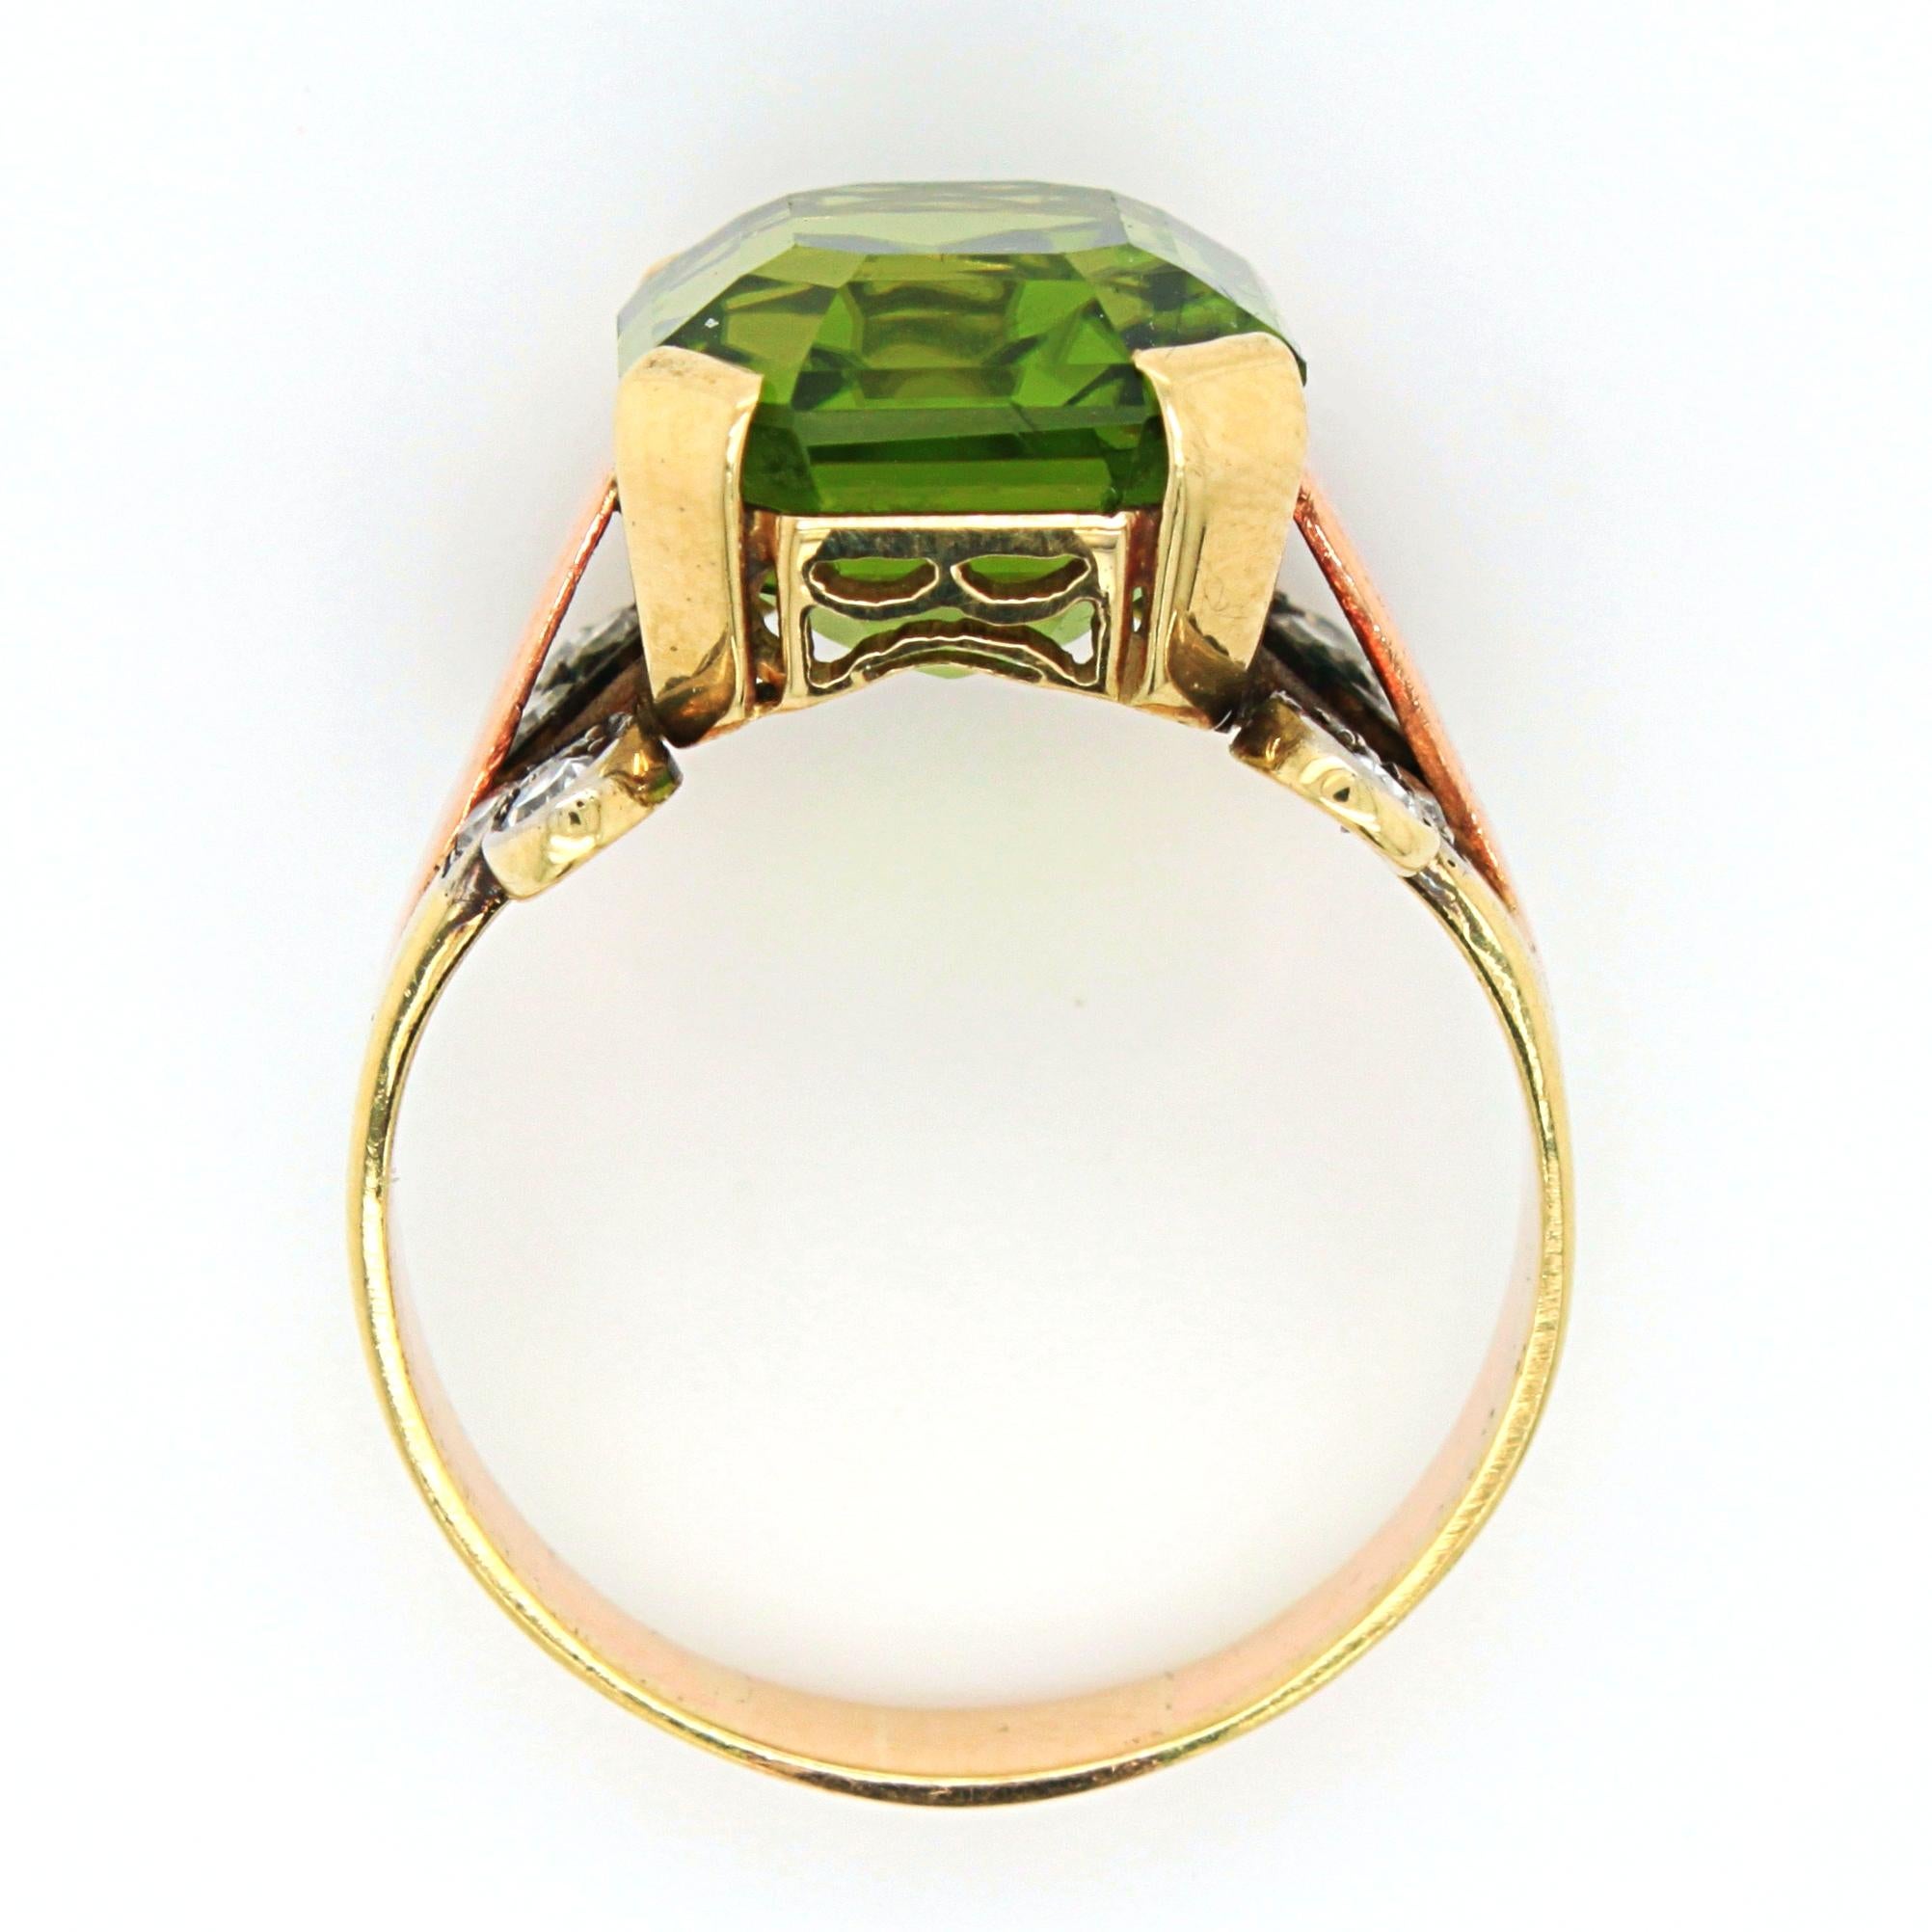 Vivid Peridot and Diamond Ring in Yellow and Red Gold, ca. 1950s 4